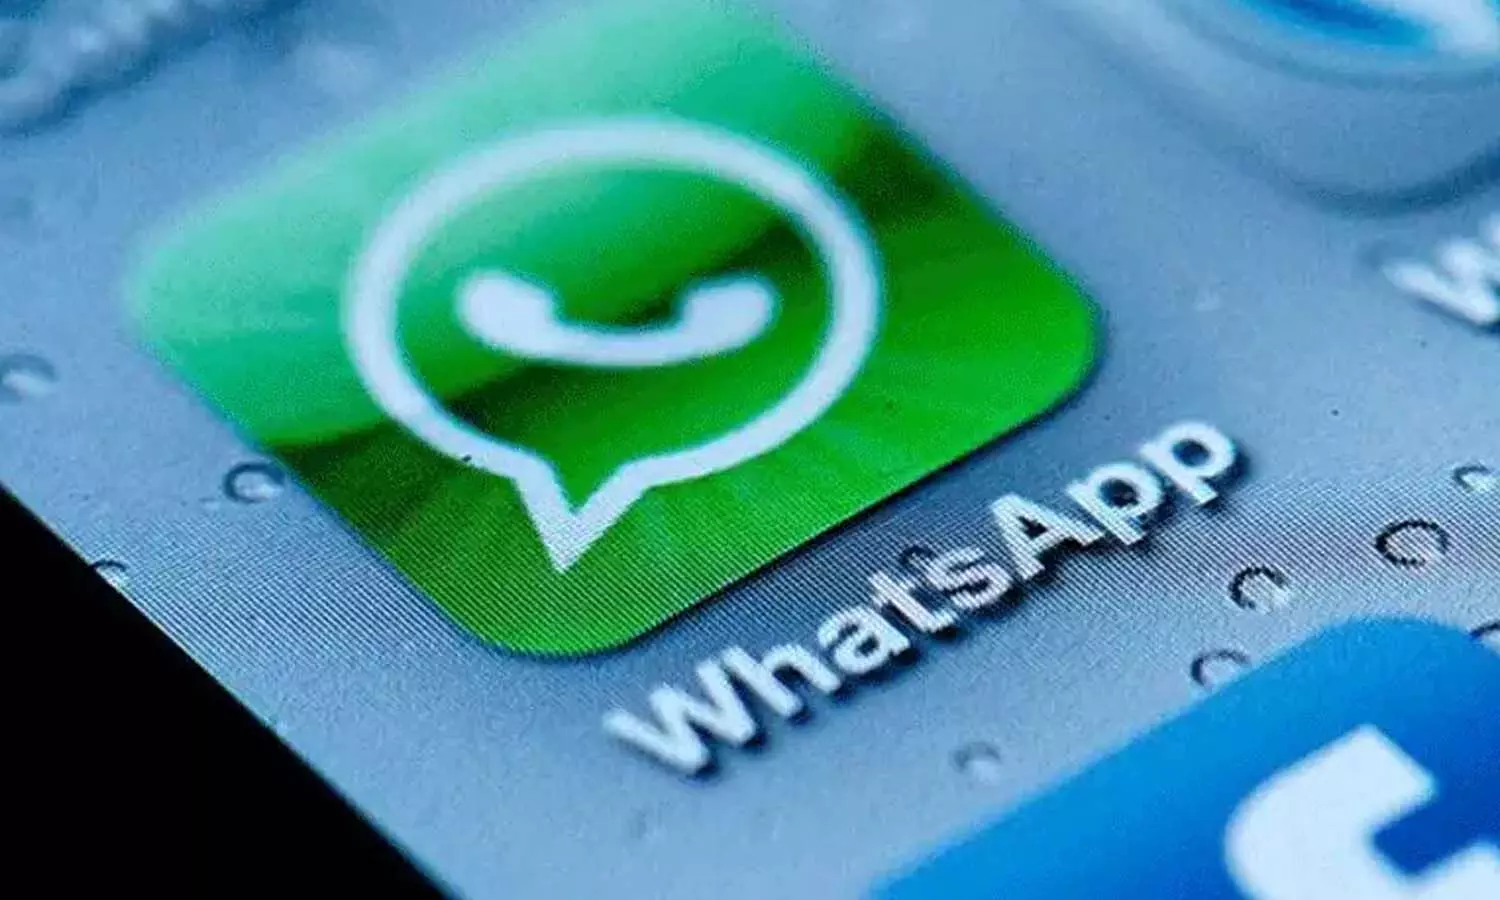 Two new features of WhatsApp for Android users